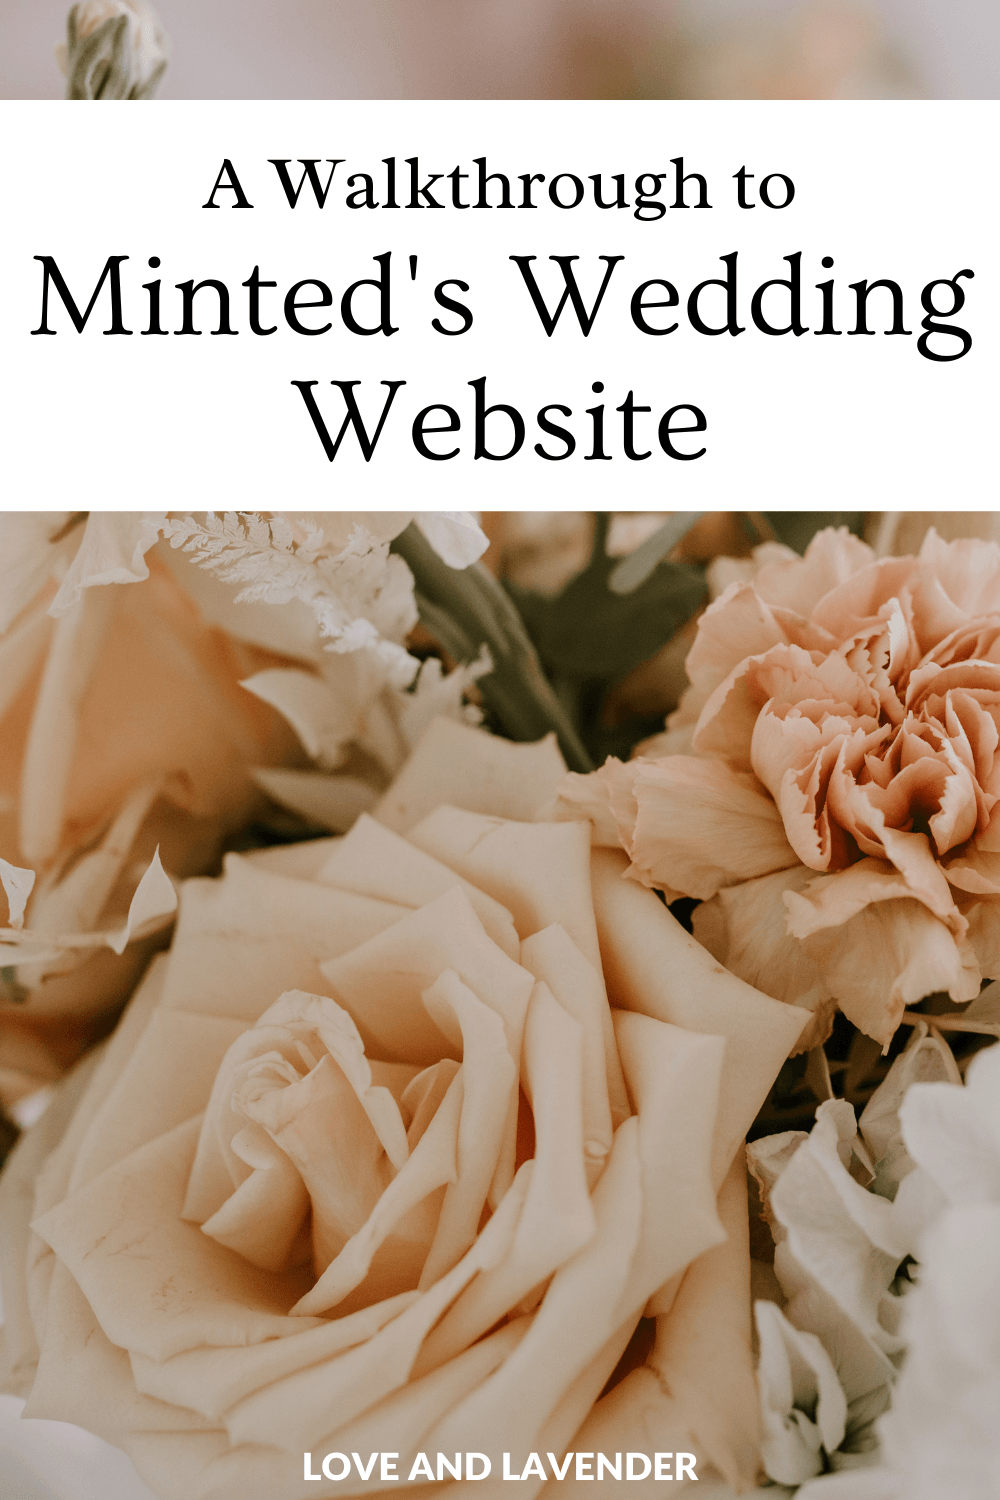 Minted Wedding Website Review 2022 (with Walkthrough)